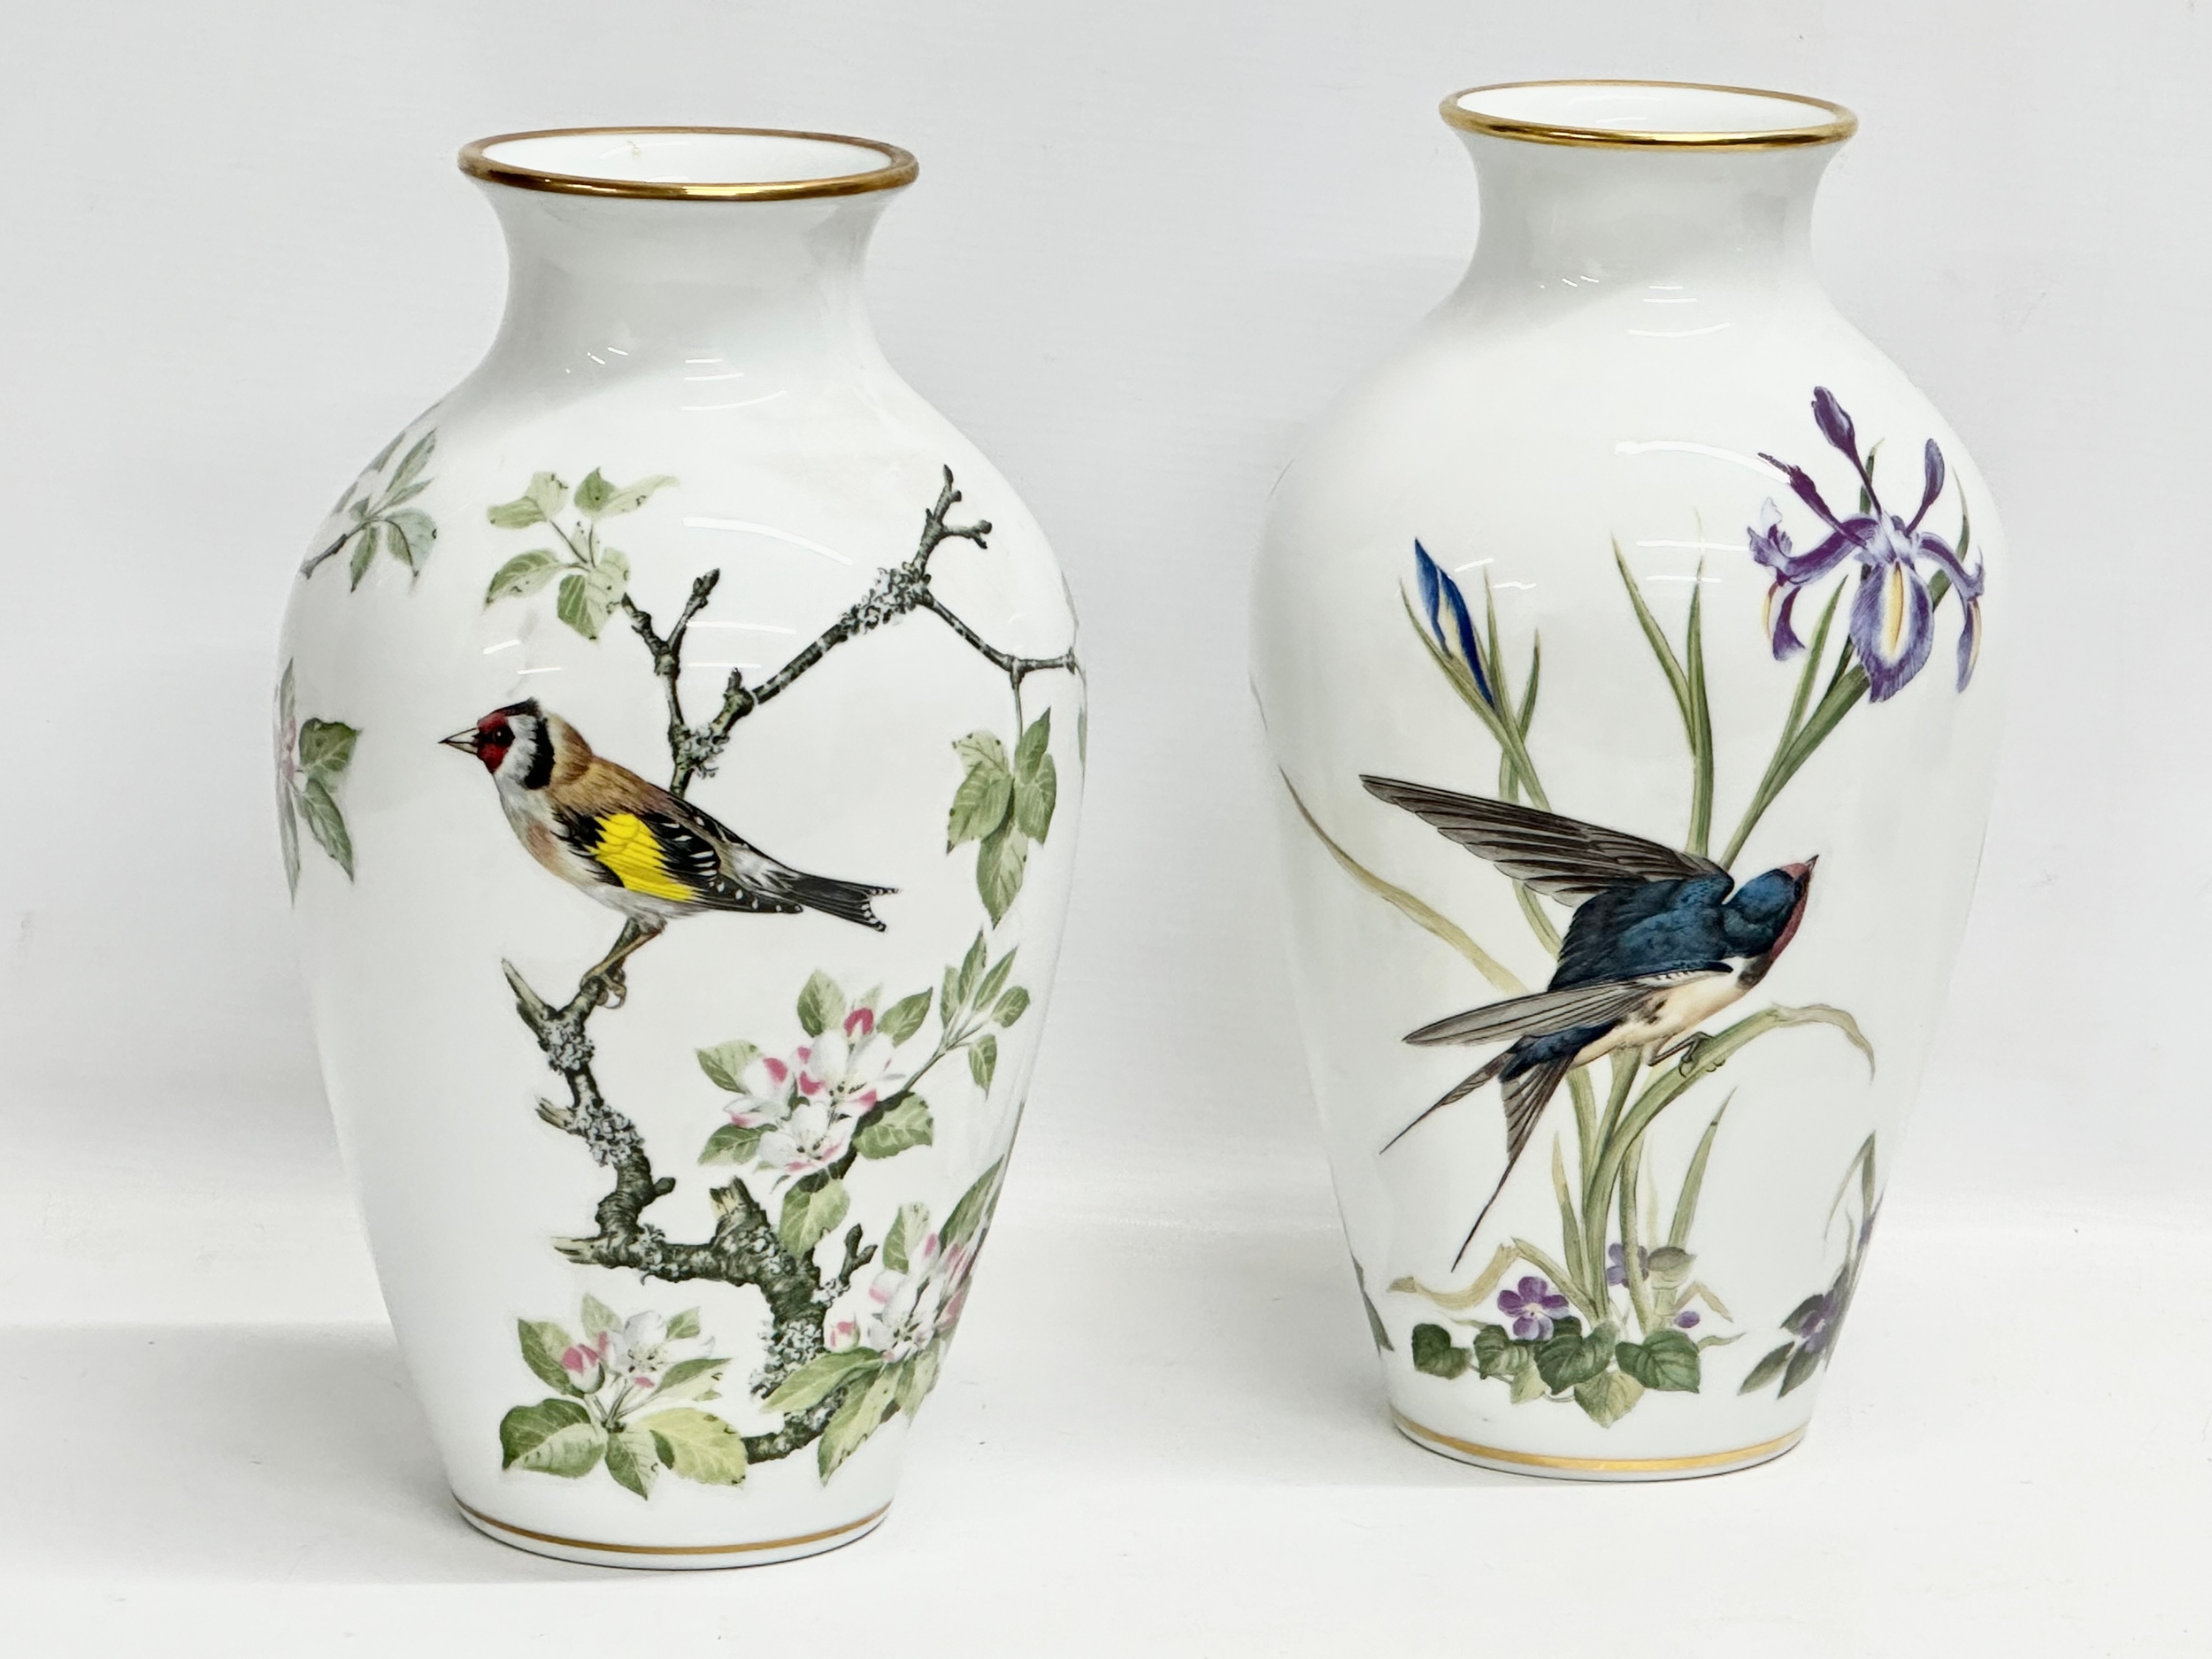 A pair of Limited Edition ‘The Meadowland Bird’ vases designed by Basil Ede for Franklin Mint. 1980. - Image 5 of 6